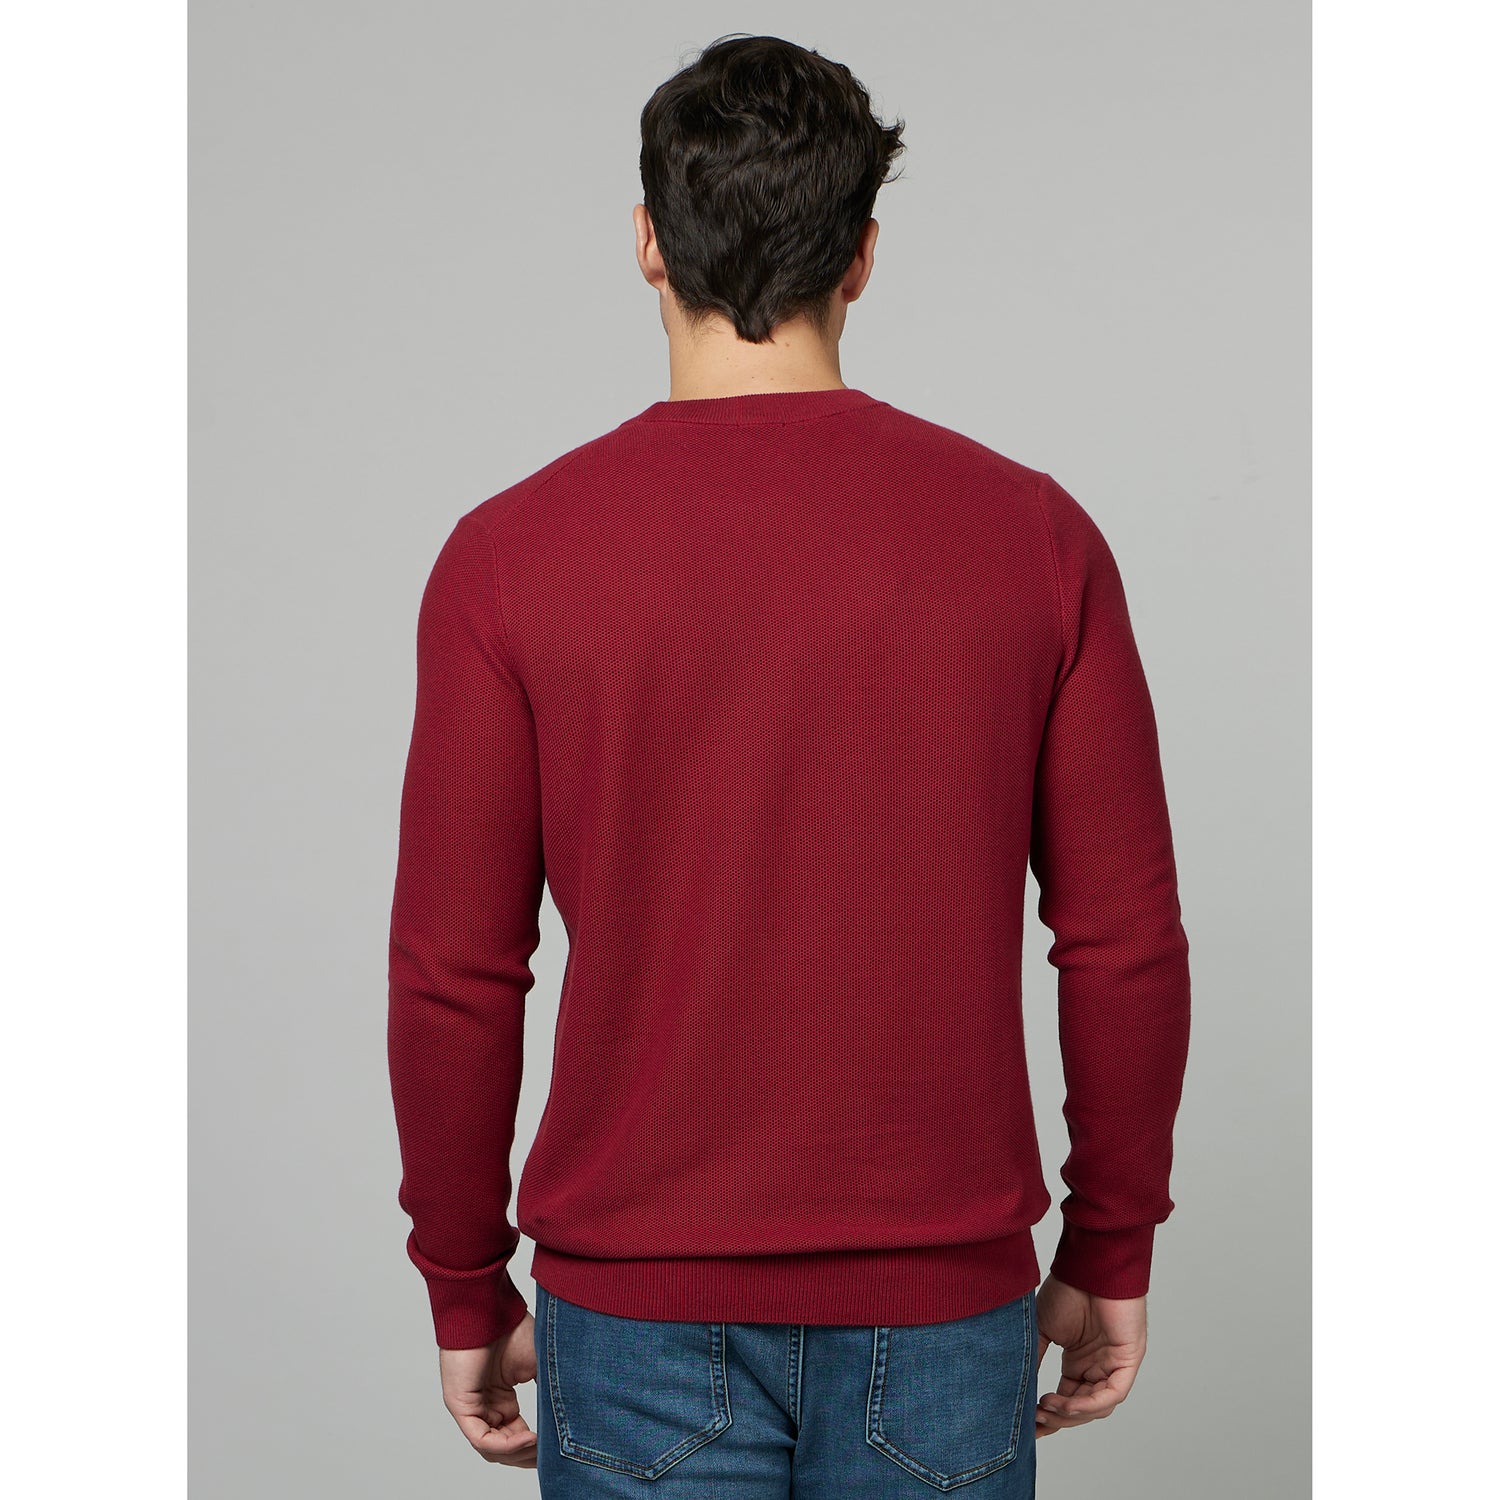 Burgundy Round Neck Long Sleeve Cotton Pullover Sweater (BEPICIN)